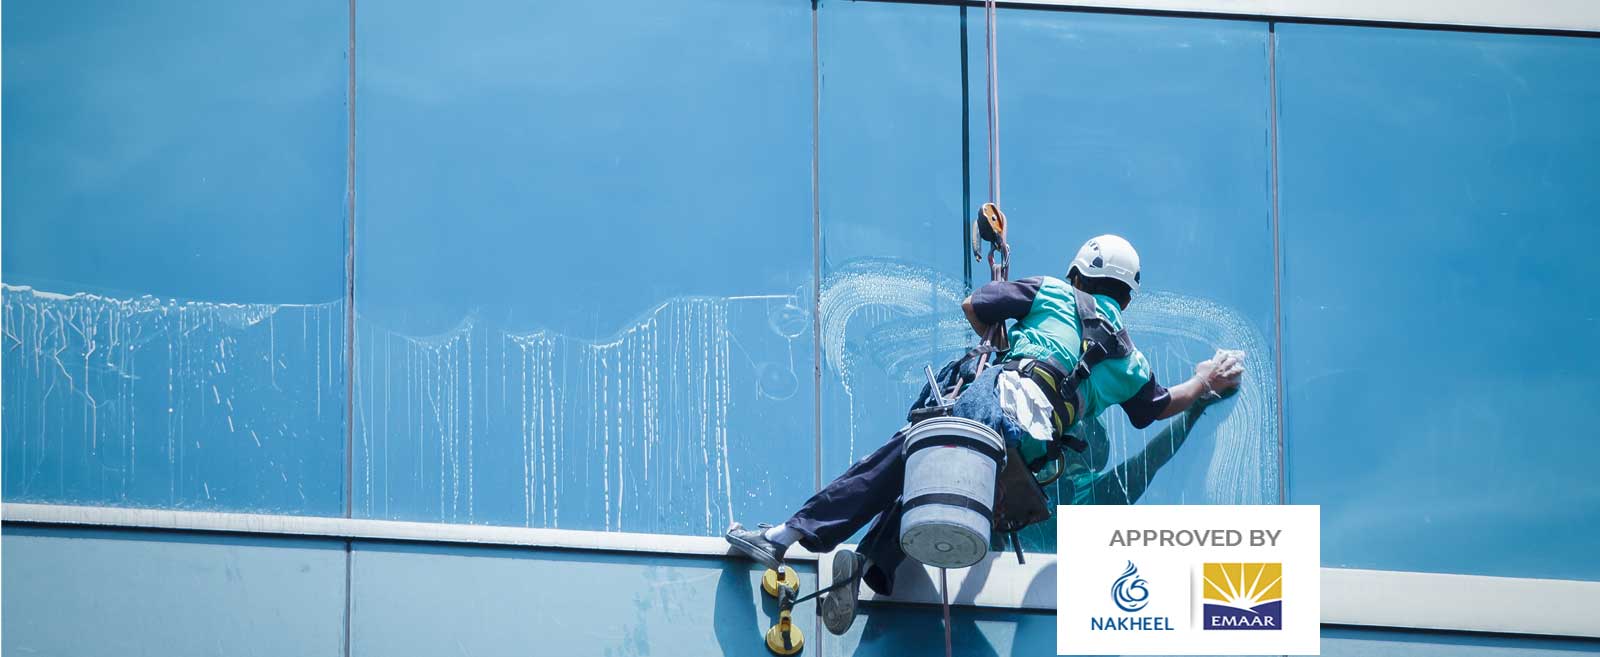 Building Cleaning and Maintenance Services in Dubai